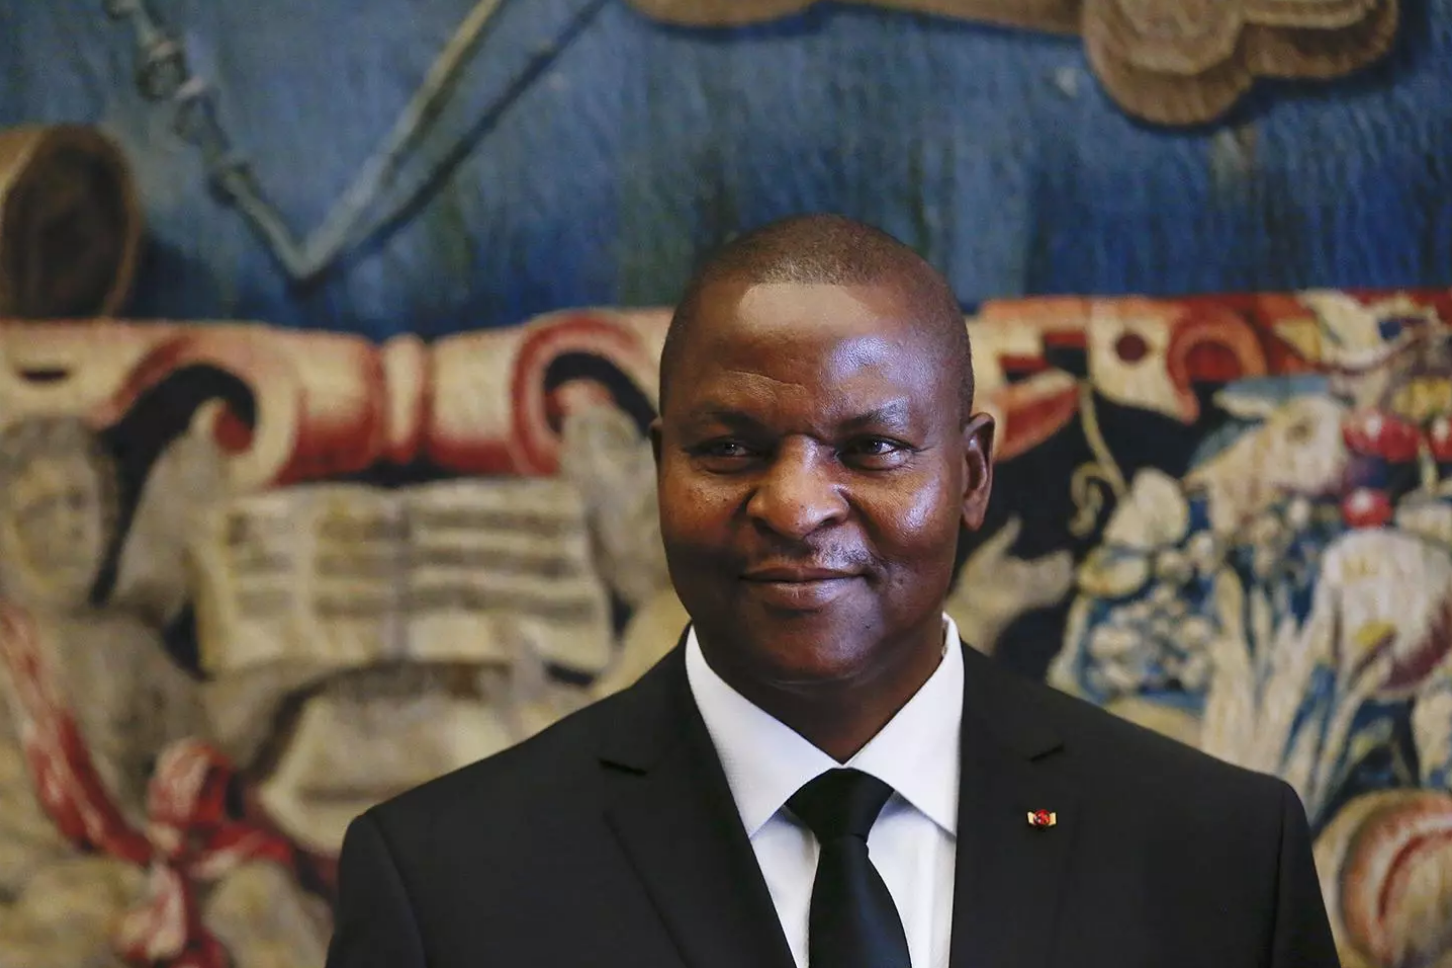 Faustin-Archange Touadéra, president of the Central African Republic, attending a meeting at the Vatican. Image by Alessandro Bianchi. Vatican City, 2018. 